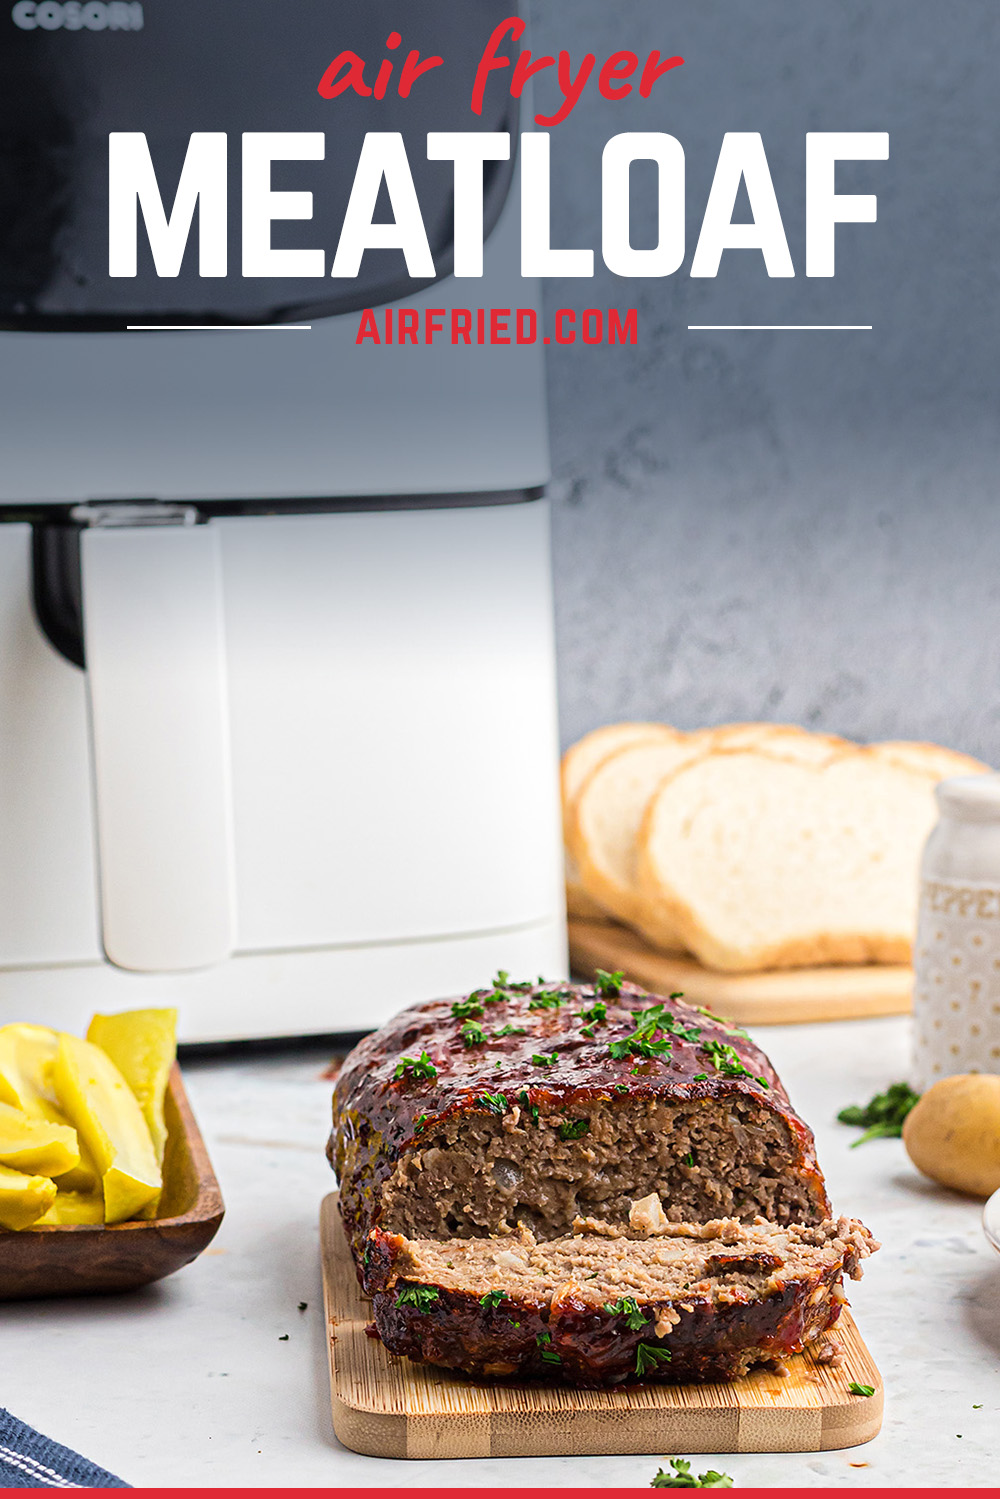 A meatloaf in front of an air fryer with a slice cut out of it.